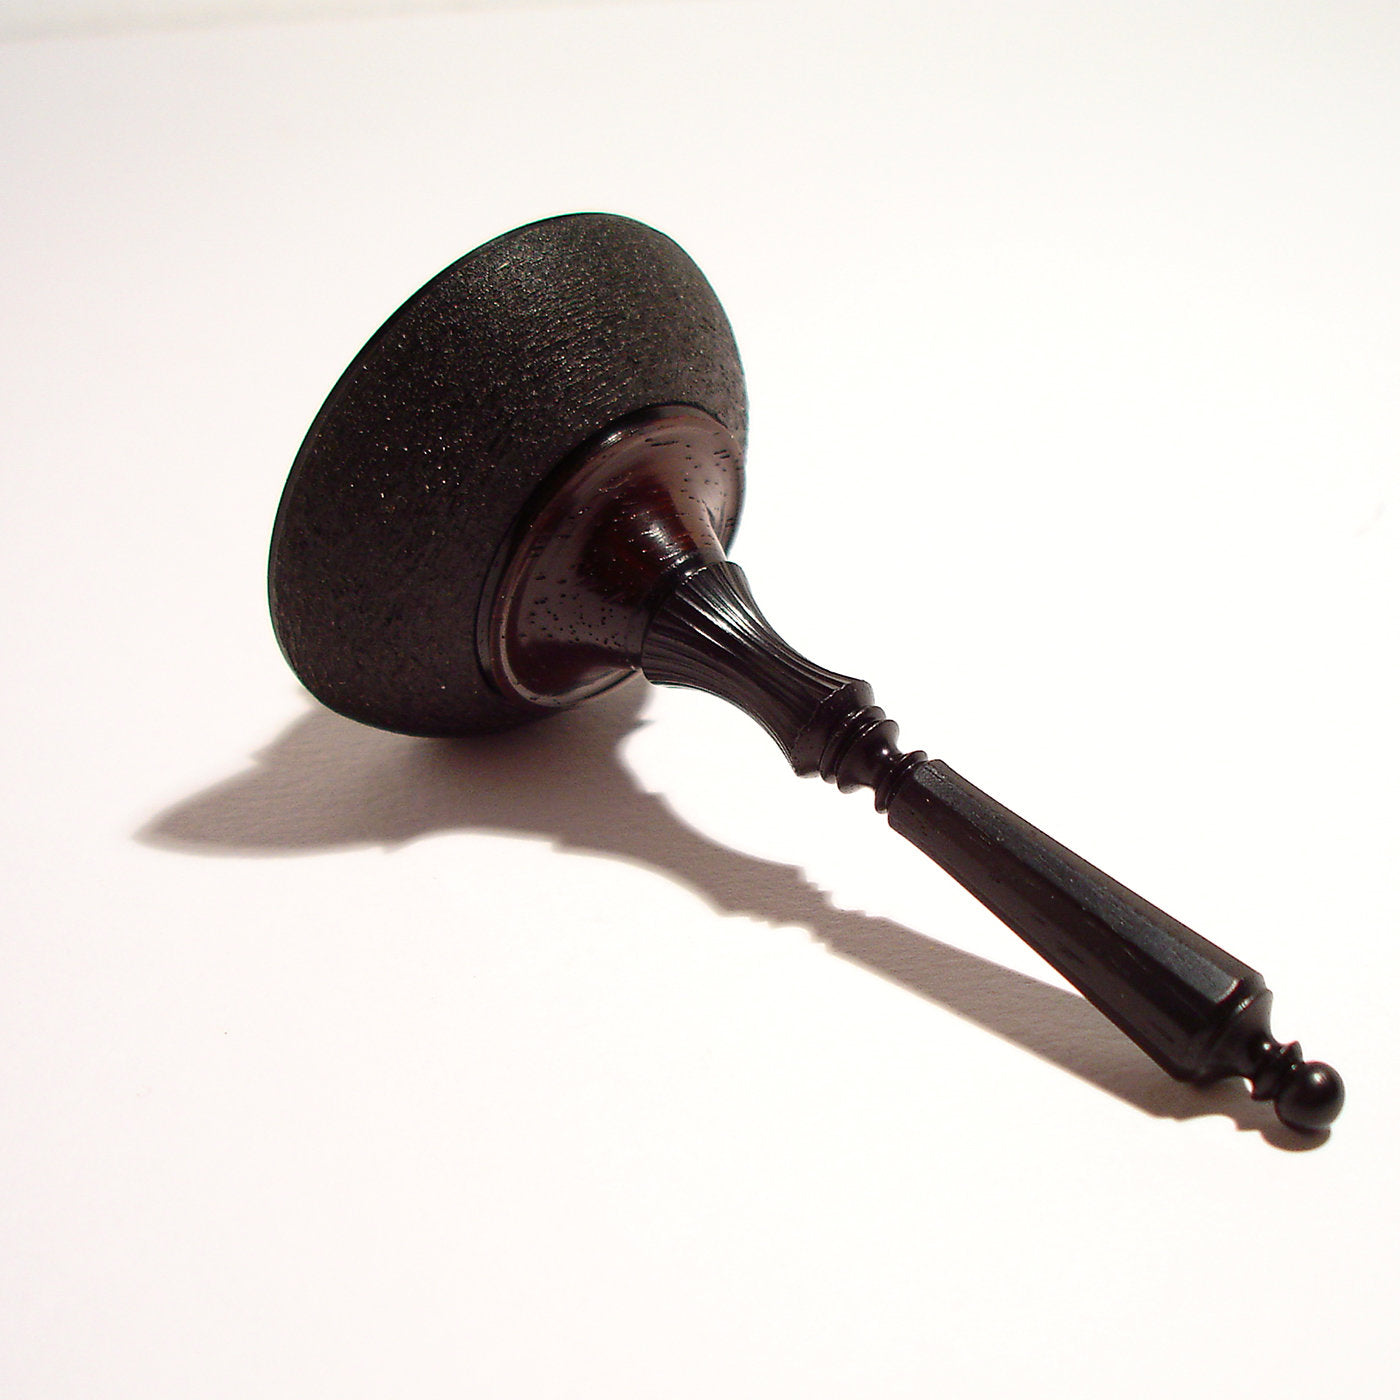 DarkStyle Spinning Top in Ebony and Rio Rosewood - Alternative view 3